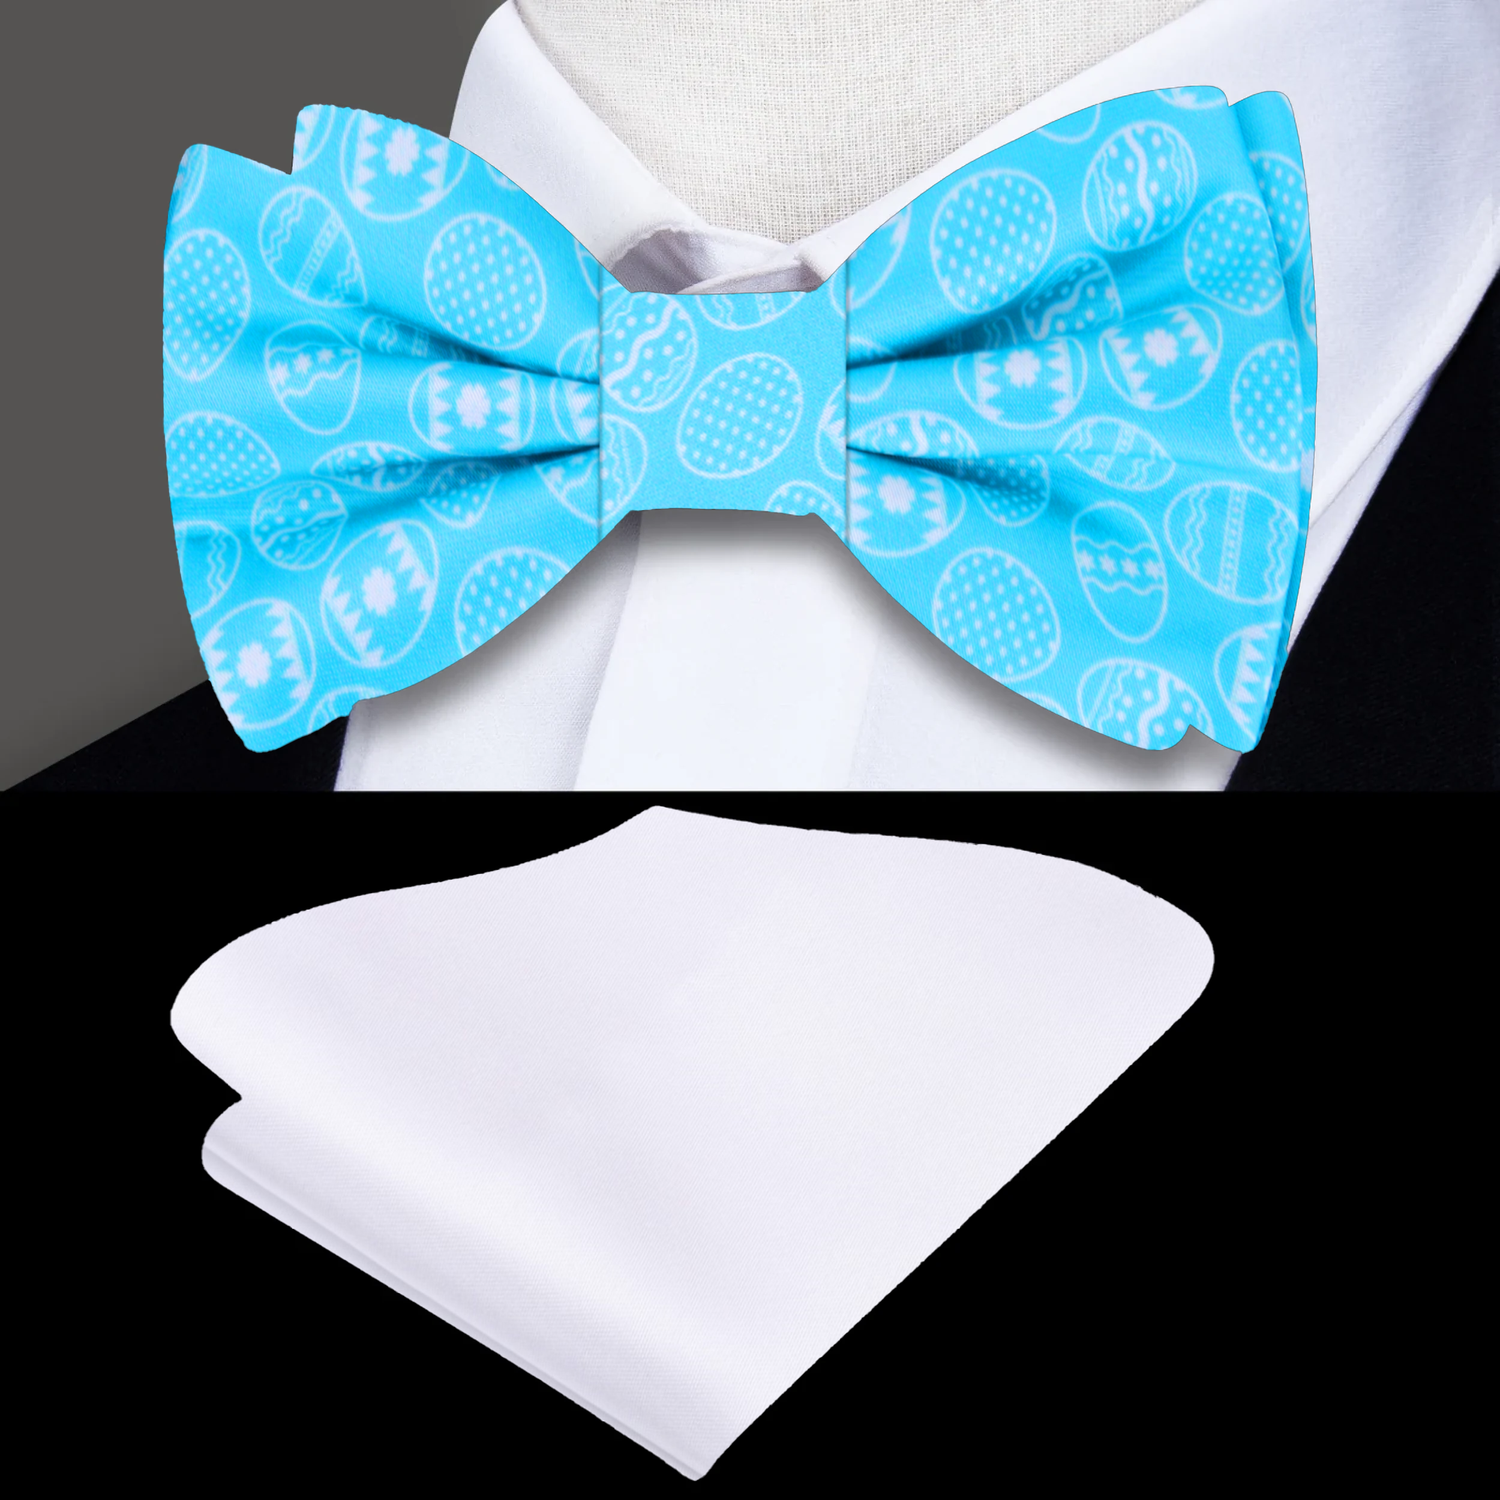 Bright Blue Easter Eggs Bow Tie and White Pocket Square